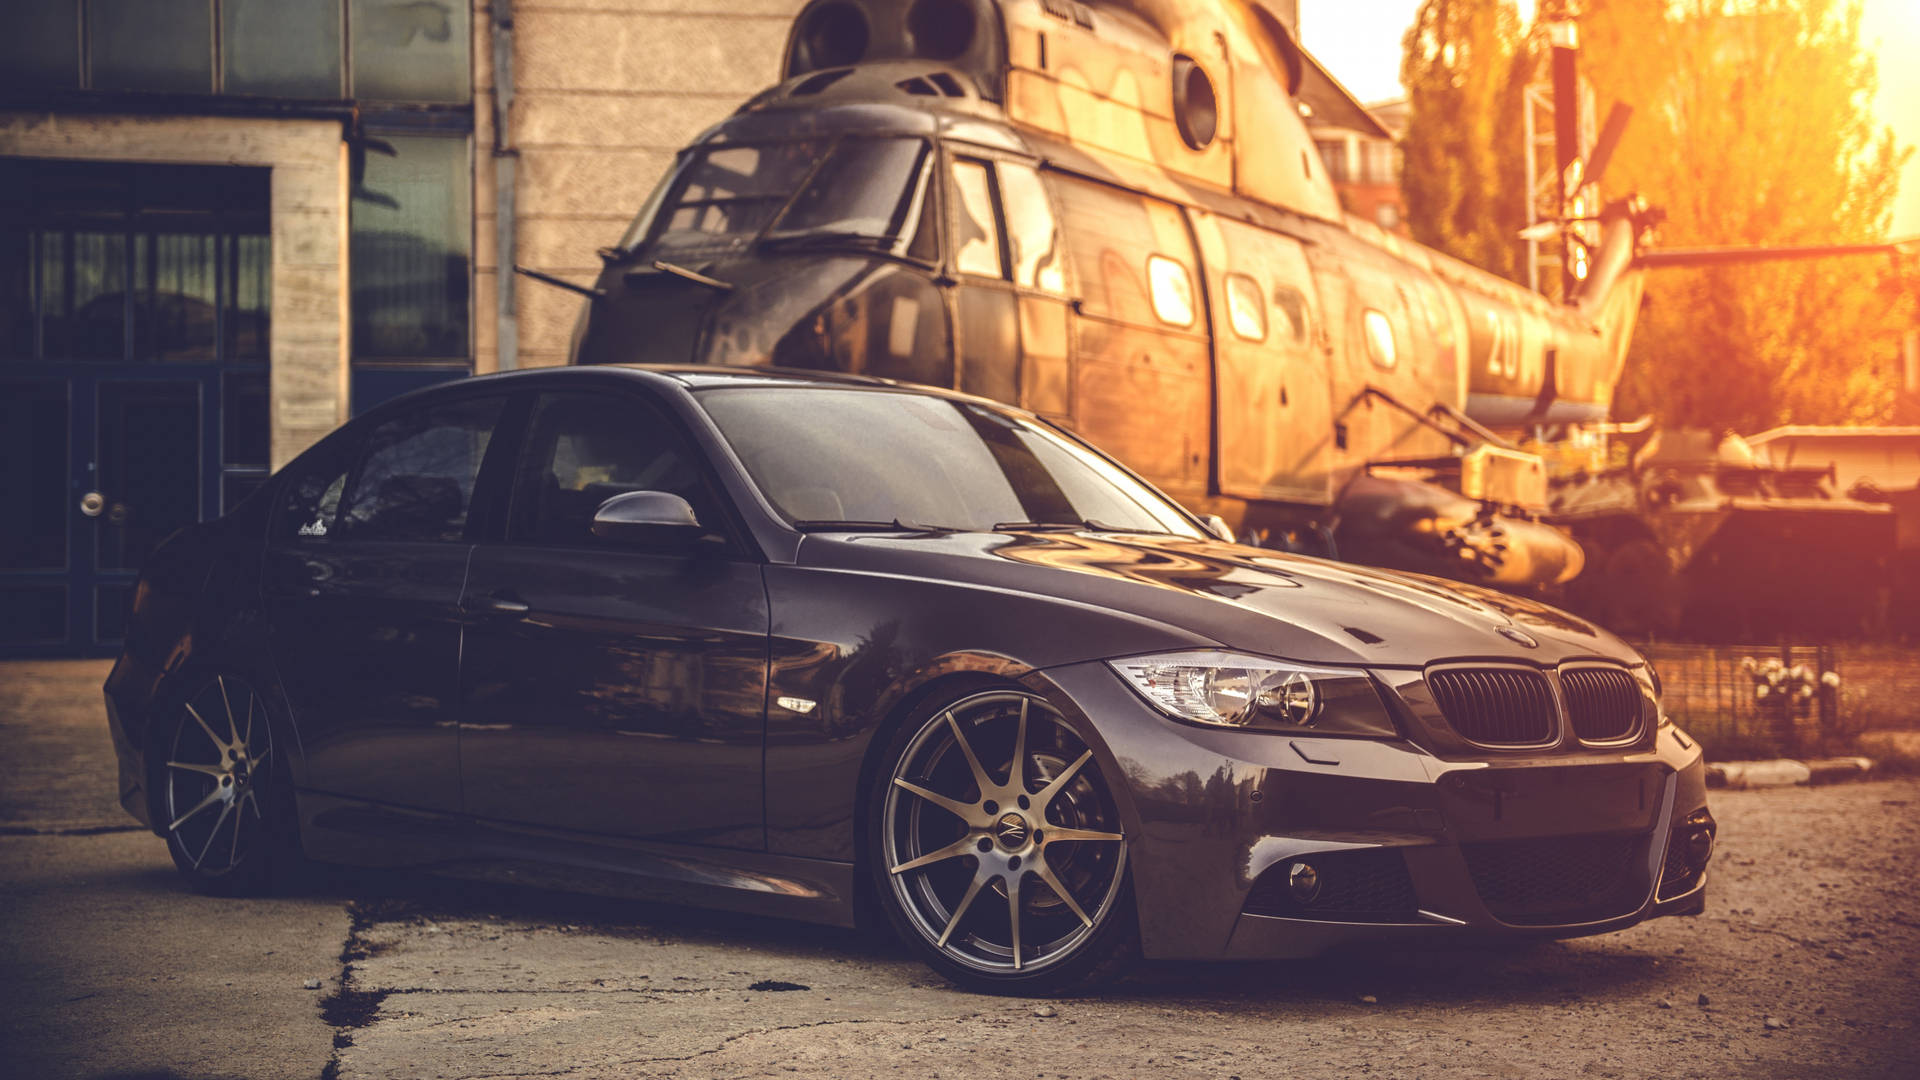 4k Bmw Car And Helicopter Wallpaper